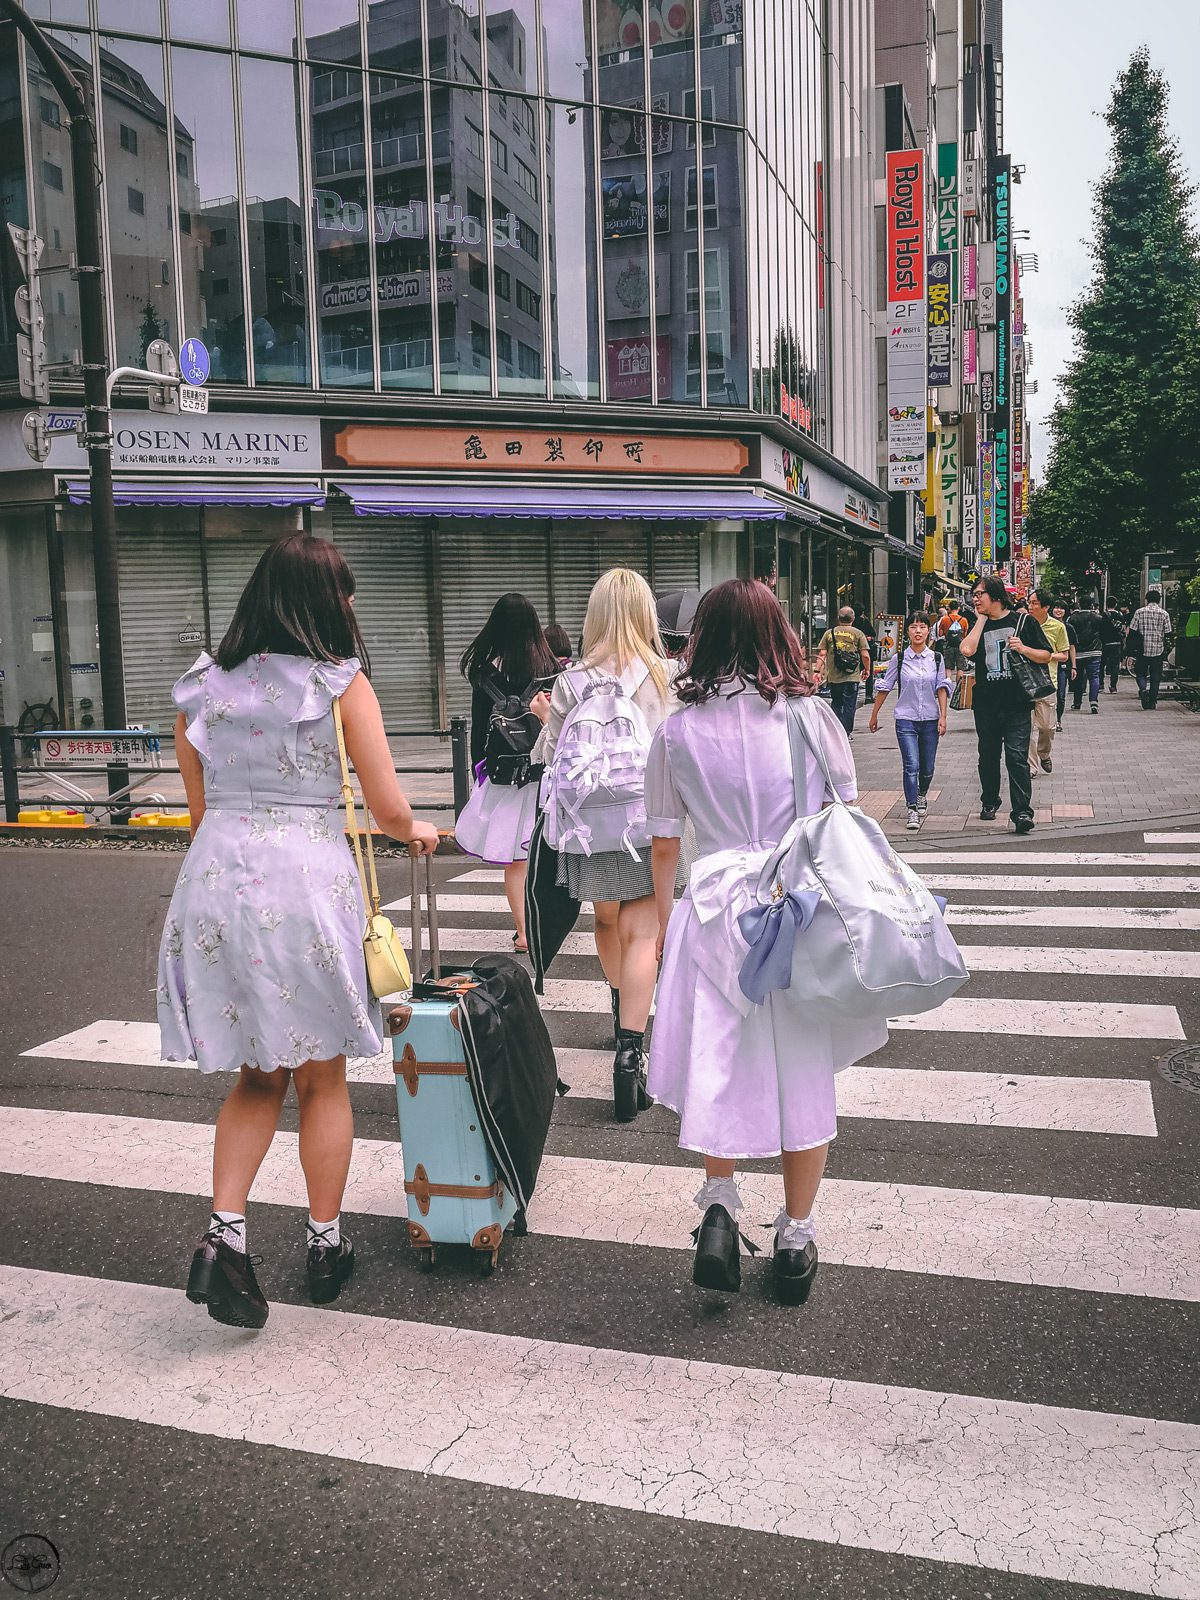 The Streets of Tokyo